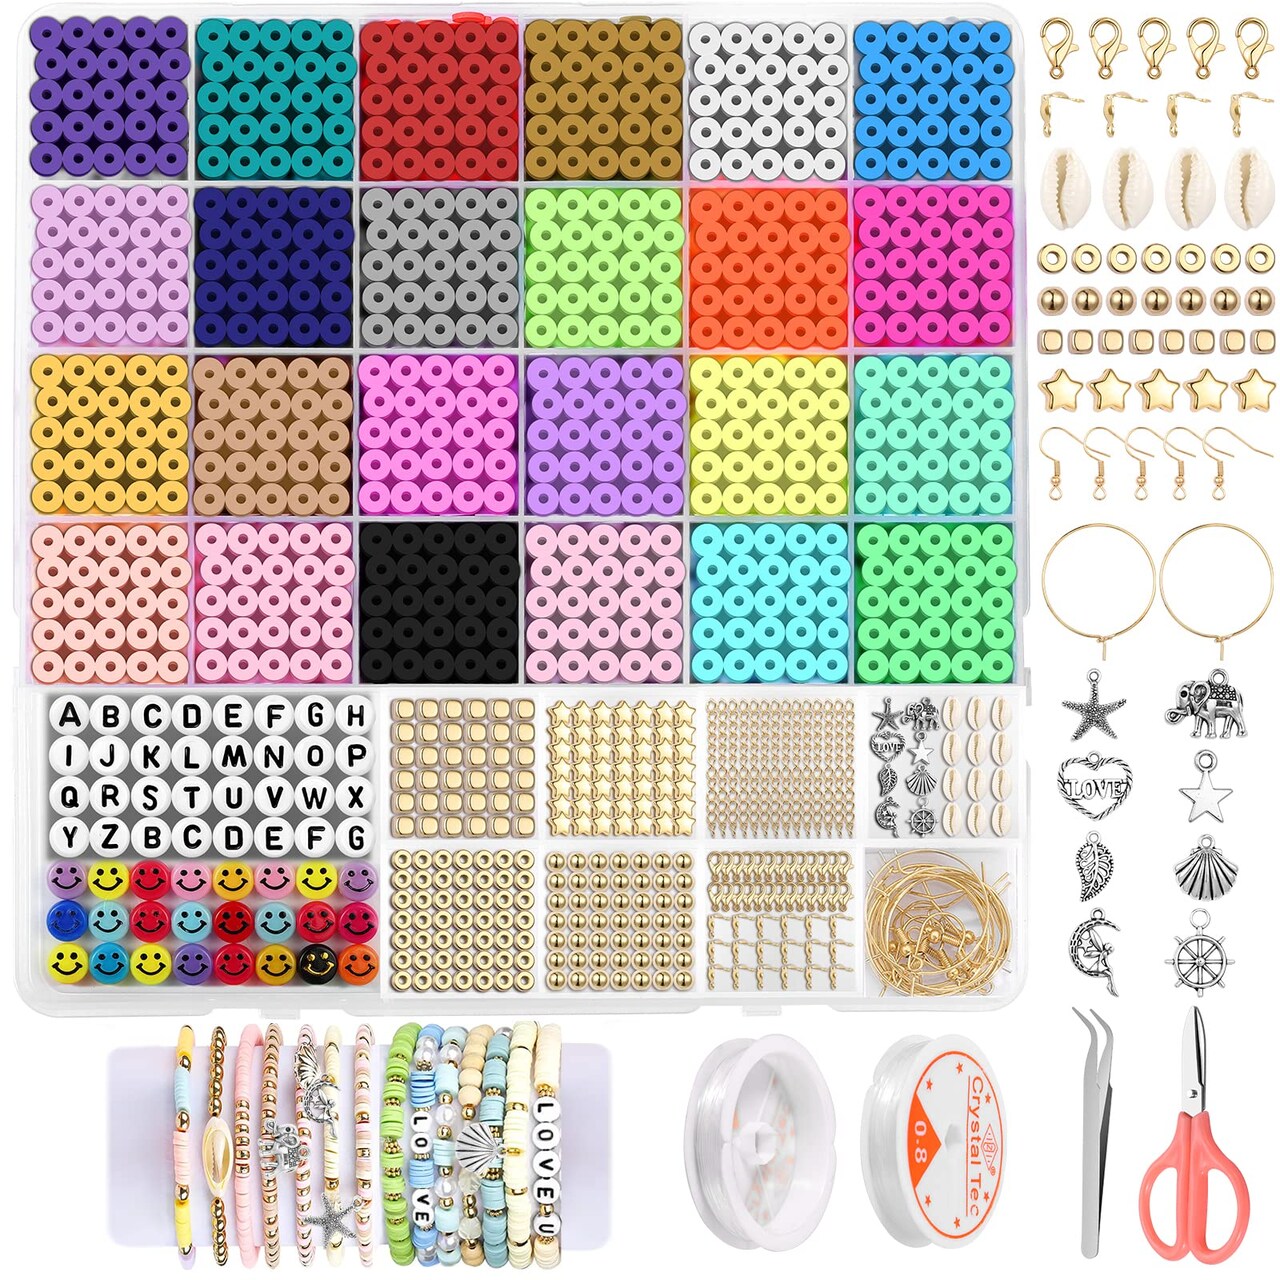 OPPRYN 6000 Pcs 24 Colors 6mm Polymer Clay Beads,Bracelet Making Kit,Preppy  Flat Spacer Heishi Beads for Jewelry Making with Smiley Face Beads Letter  Beads Pendant Charms kit,Gifts/DIY